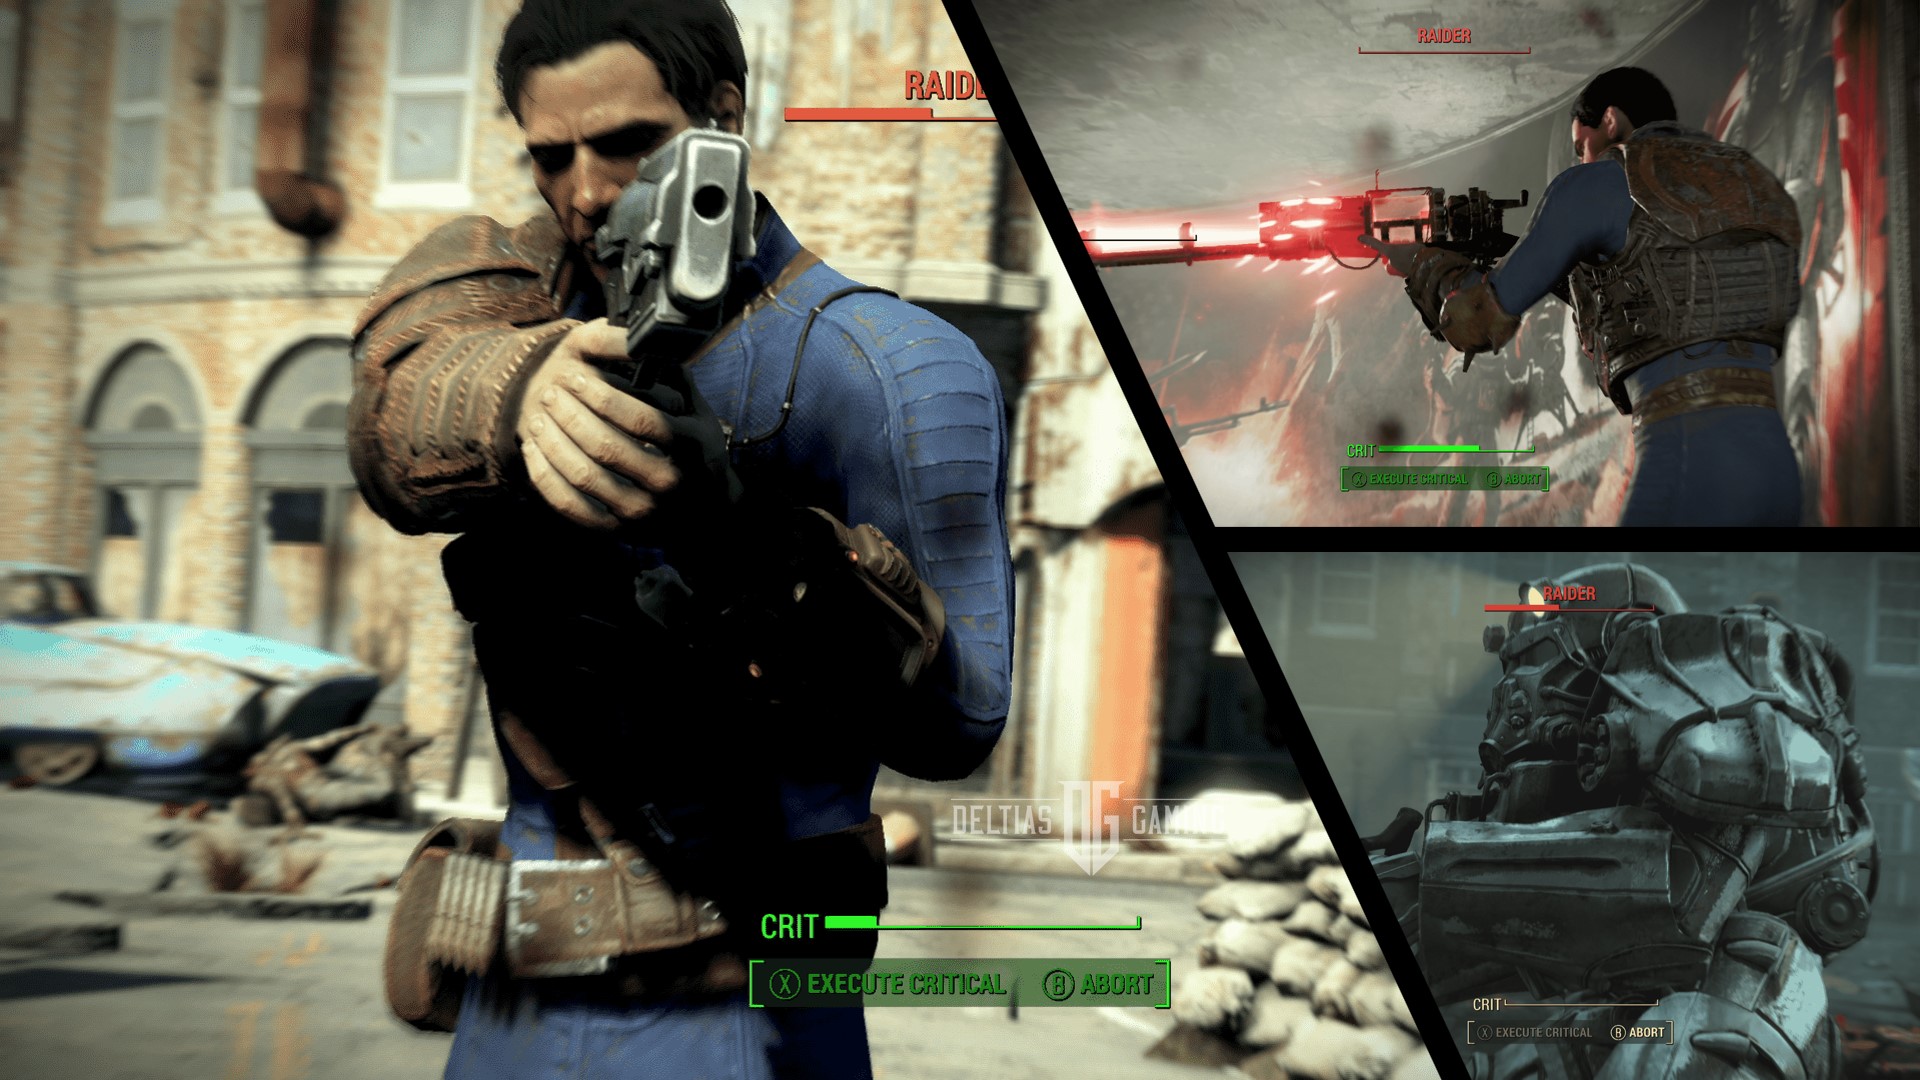 Fallout 4: The Best 5 Builds You Should Use